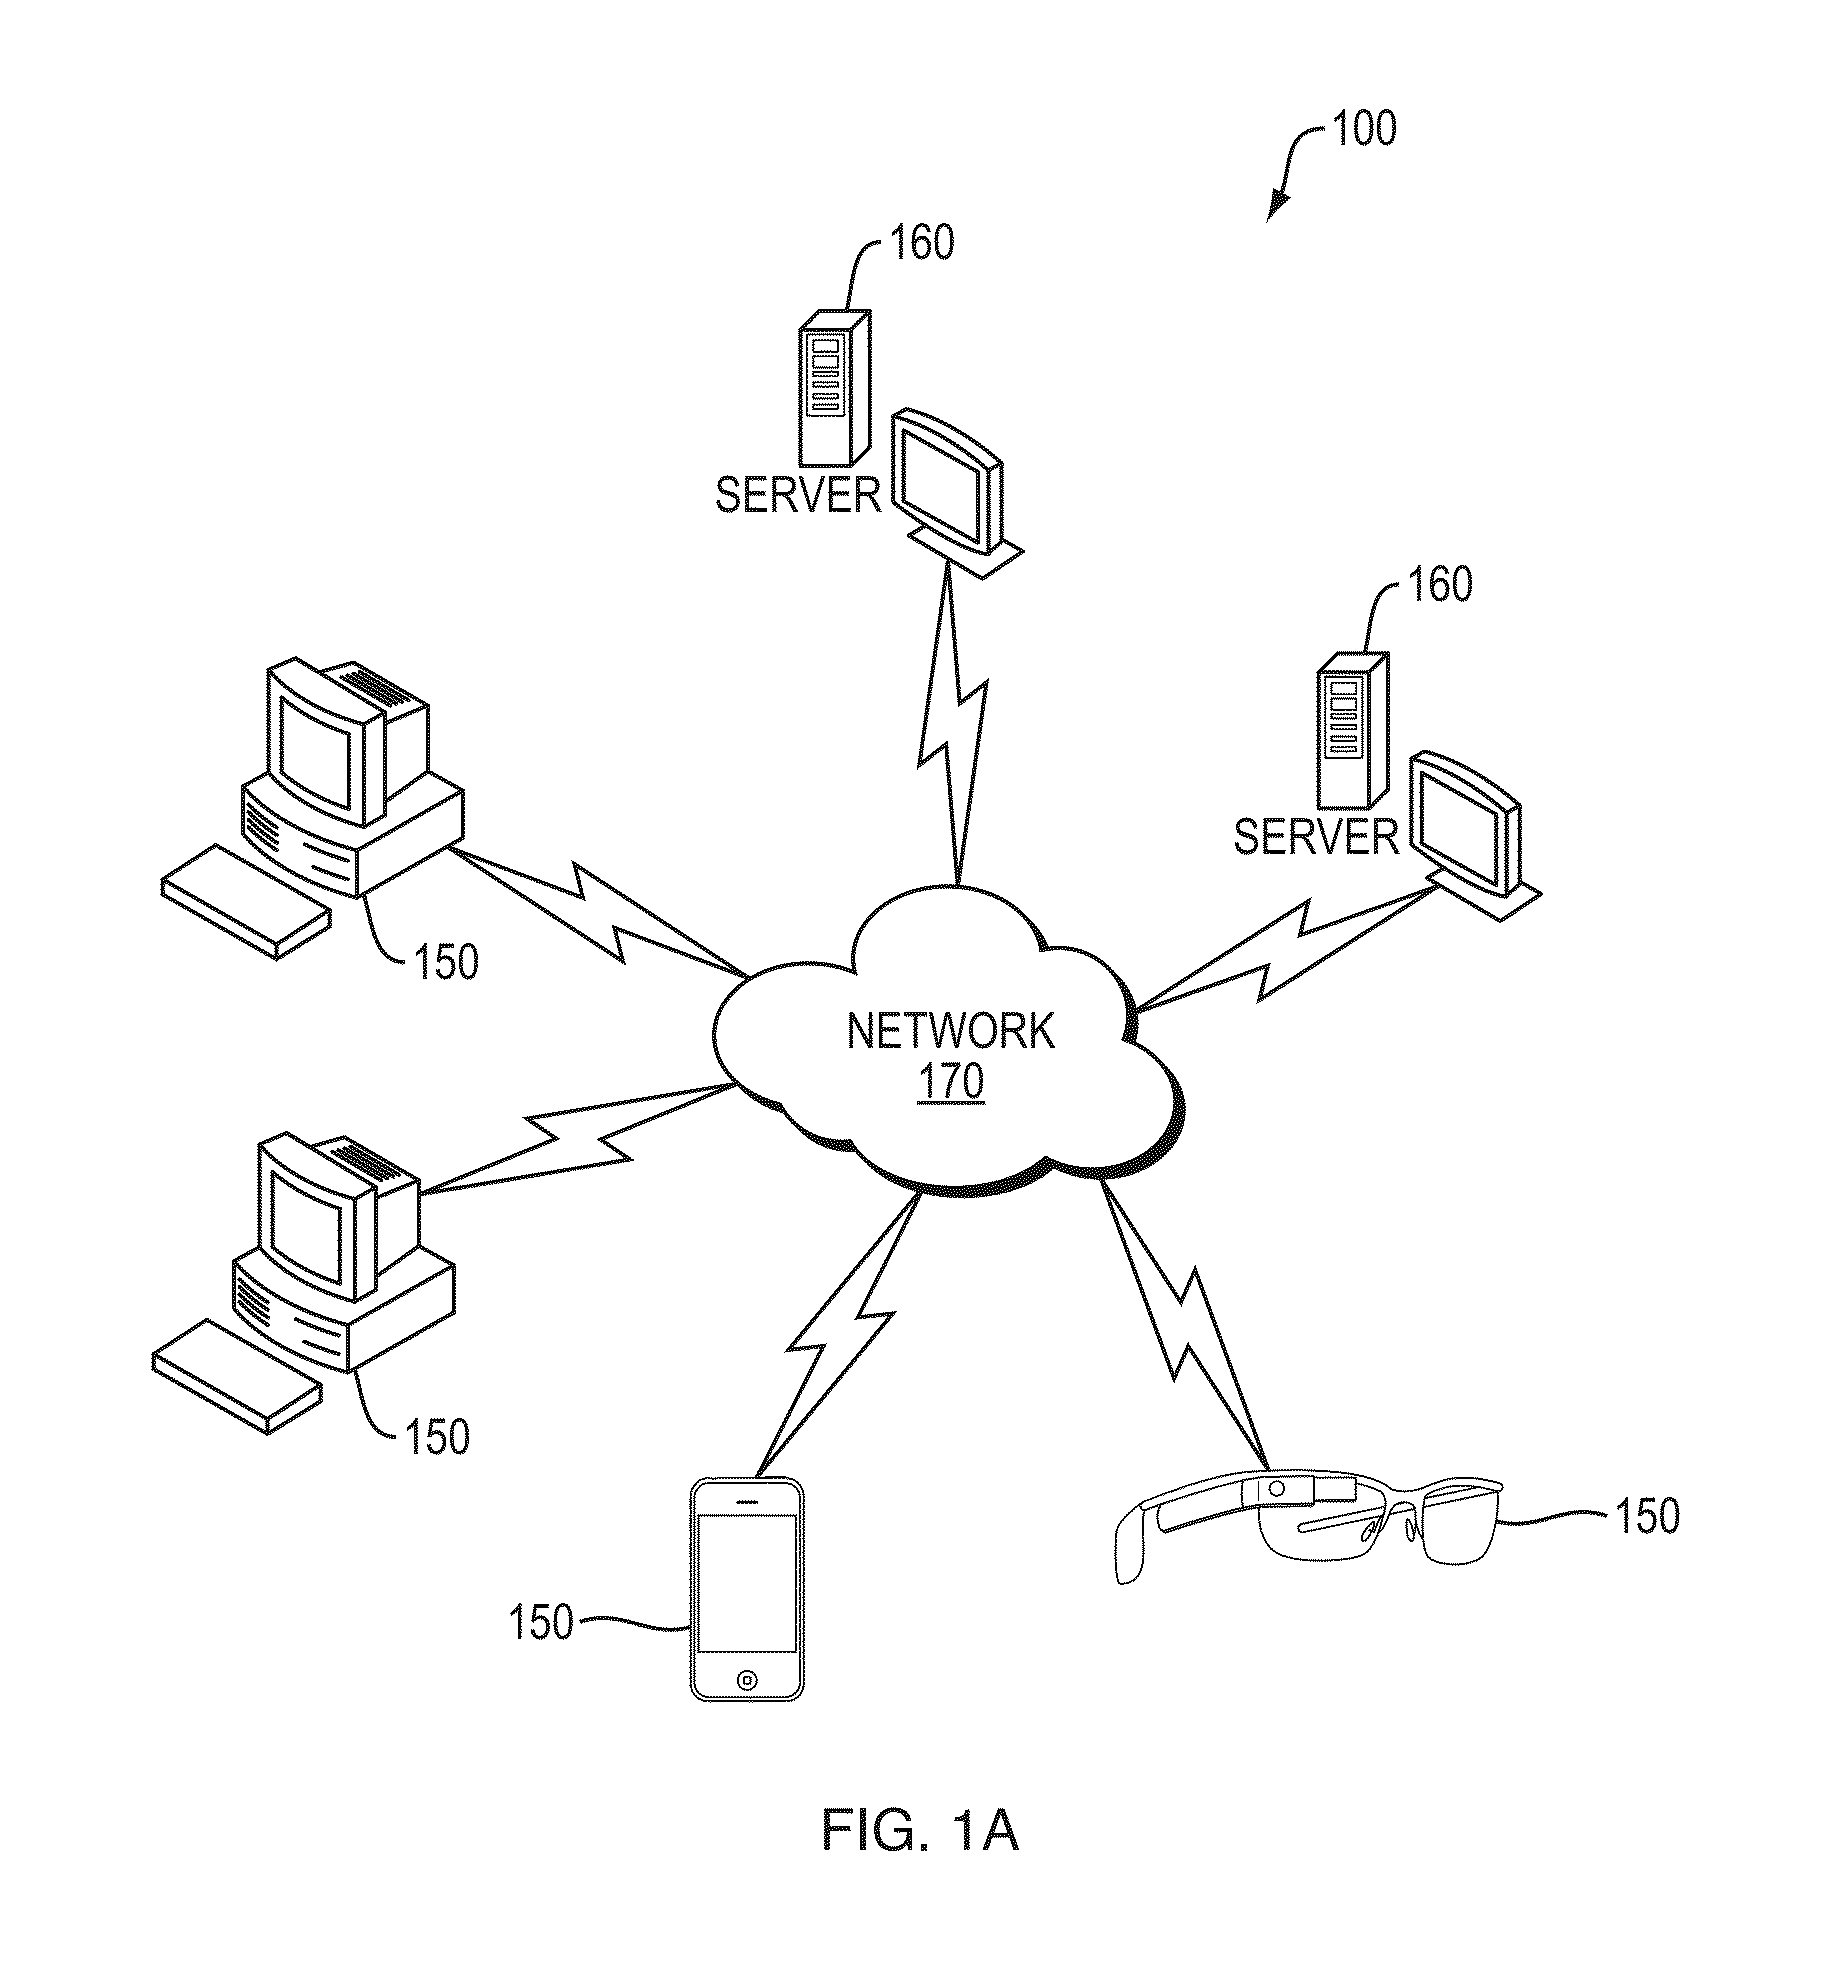 Locking Applications and Devices Using Secure Out-of-Band Channels